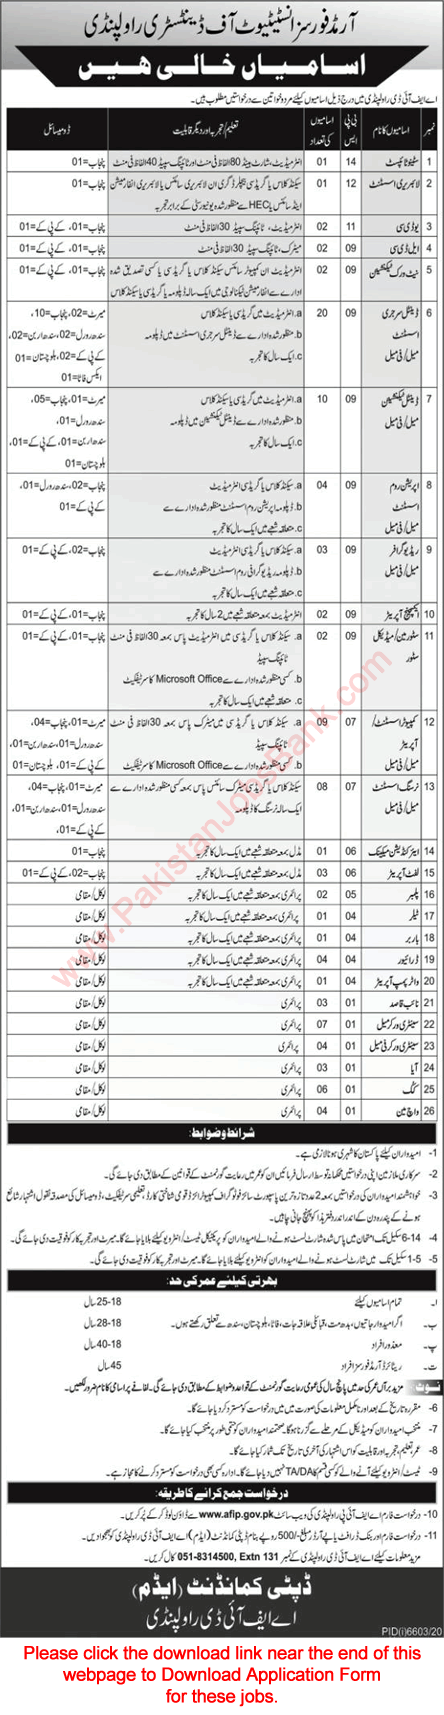 Armed Forces Institute of Dentistry Rawalpindi Jobs 2021 June AFID Application Form Dental Surgery Assistants & Others Latest